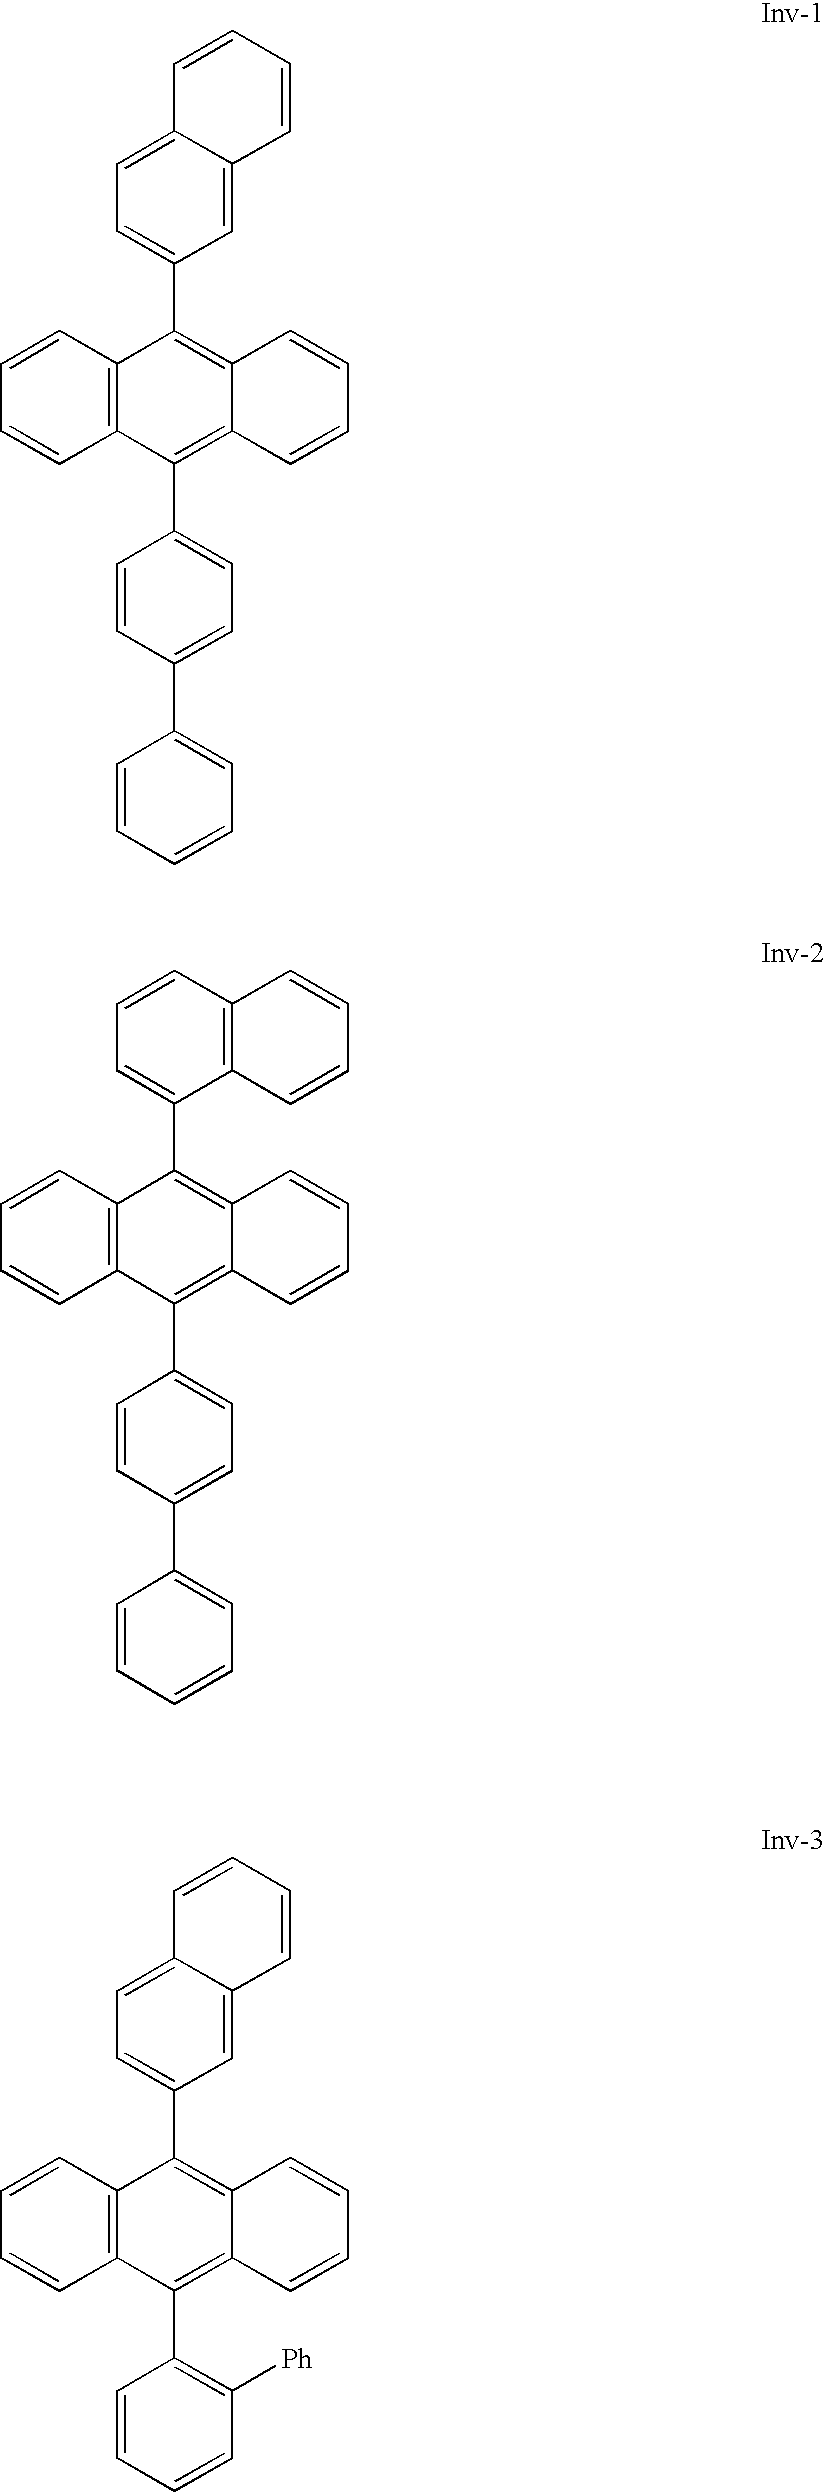 Electroluminescent device with anthracene derivative host